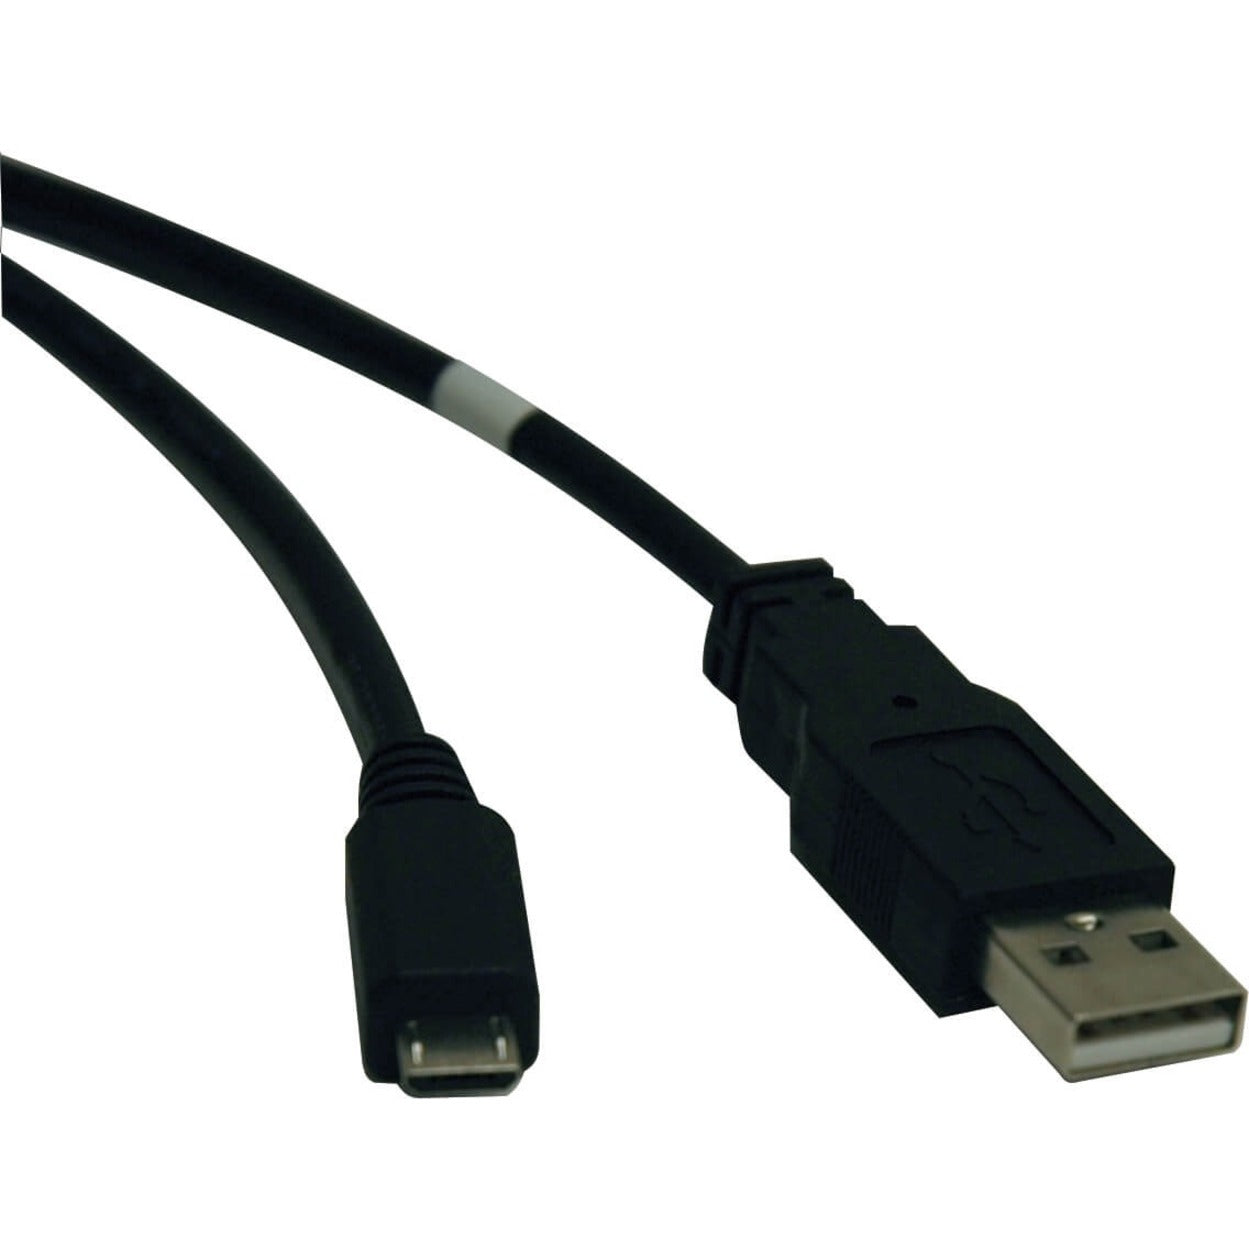 Tripp Lite U050-006 USB to Micro-USB Cable, 6ft, 480Mbps Data Transfer, Durable and Reliable